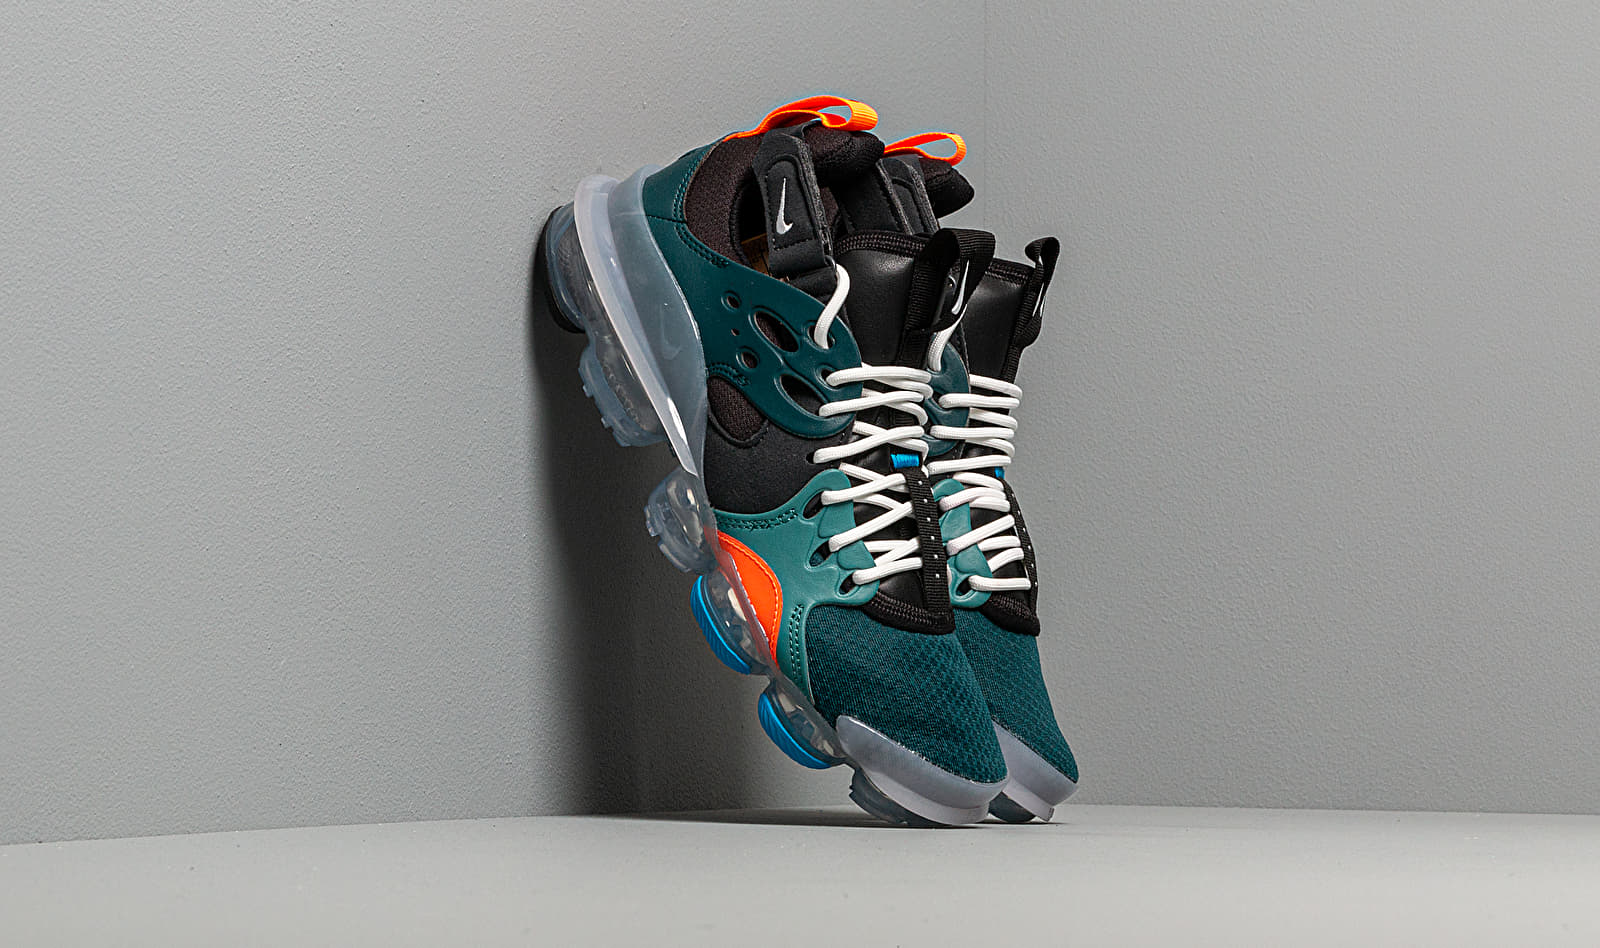 Nike Air Dsvm Midnight Turq/ White-Mineral Teal AT8179-300